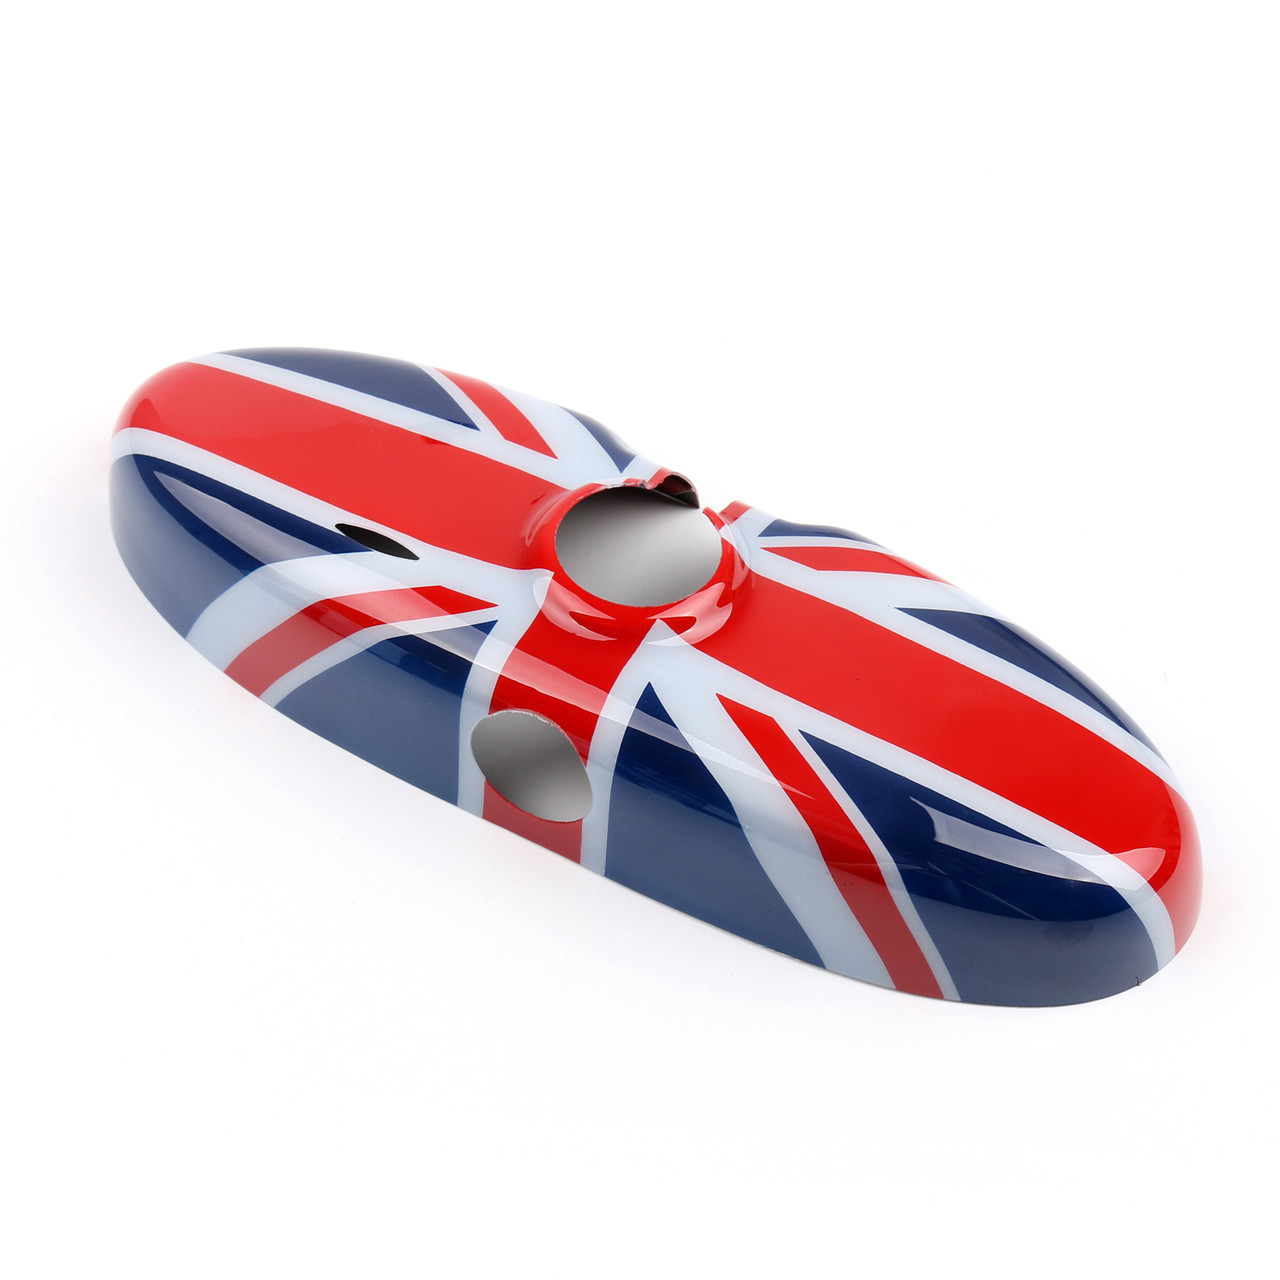 Union Jack UK Flag Rear View Mirror Cover Fit For MINI Cooper R55 R56 R57 Blue/Red